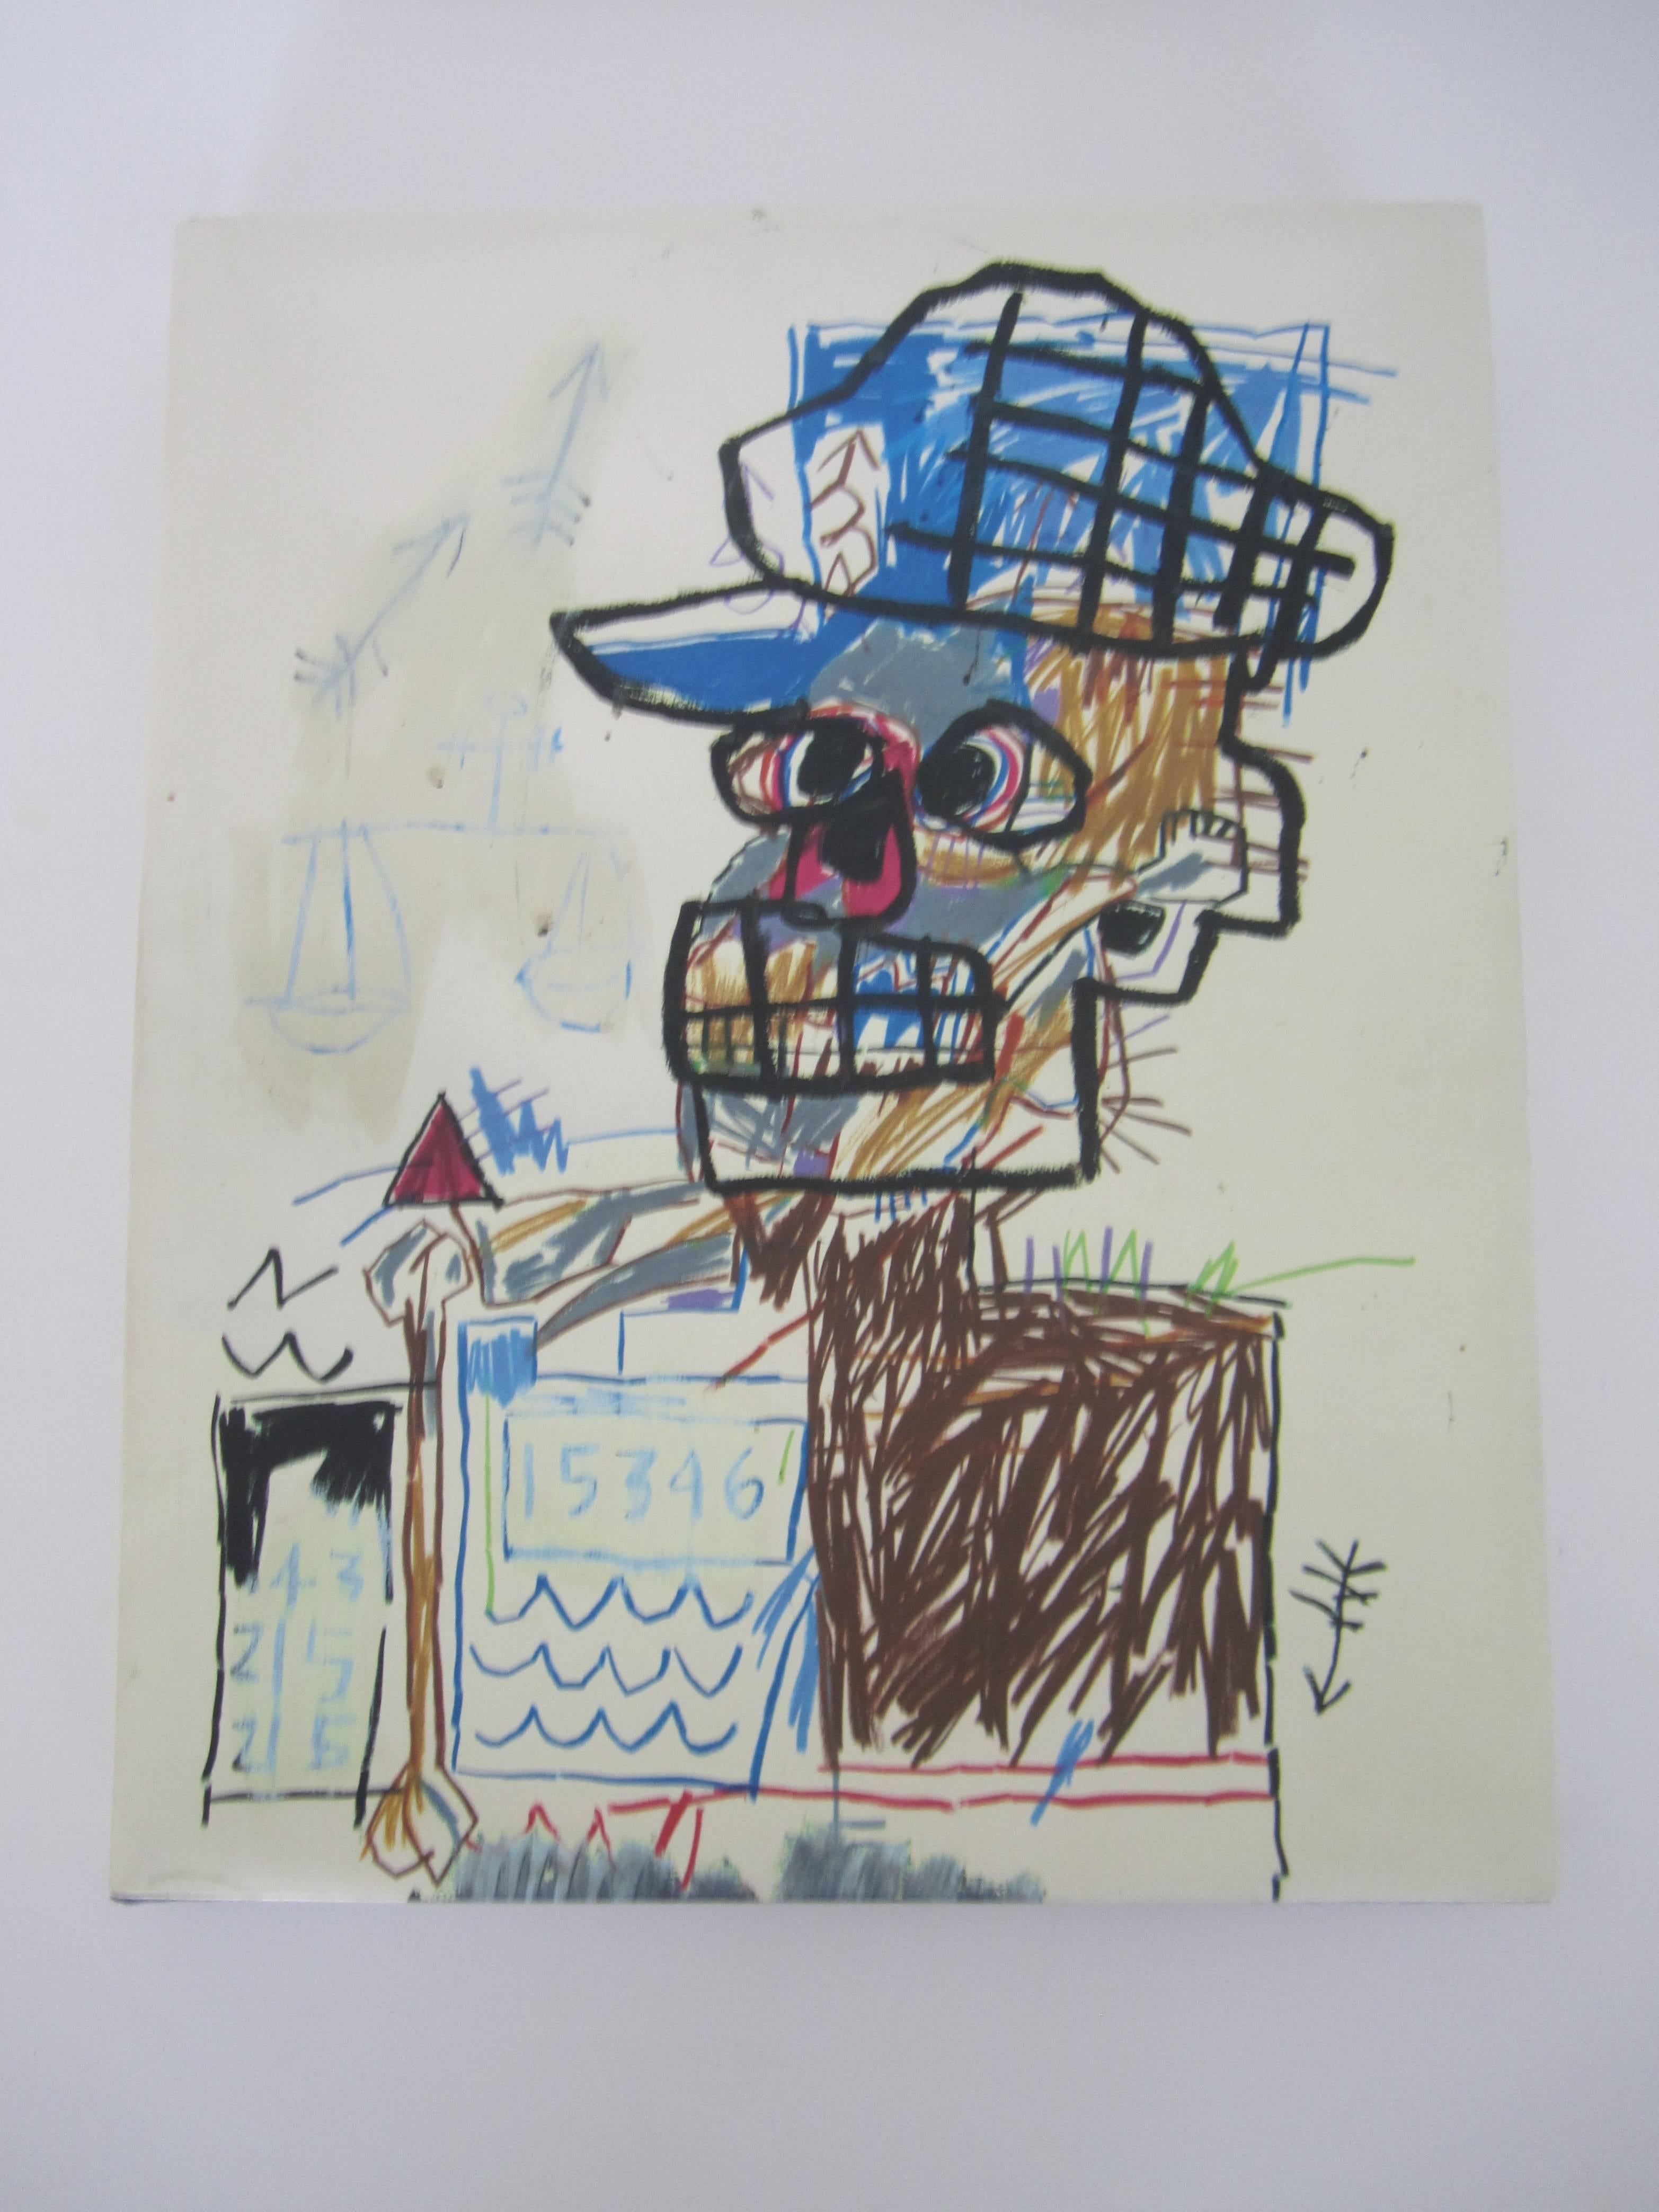 A Jean-Michel Basquiat 'Drawing' coffee table or library book. A story, with original writing and work, of the Brooklyn born artist from a private New York collection. Book is 'perfect bound hard cover' with a folded 'dust jacket' cover.
Item